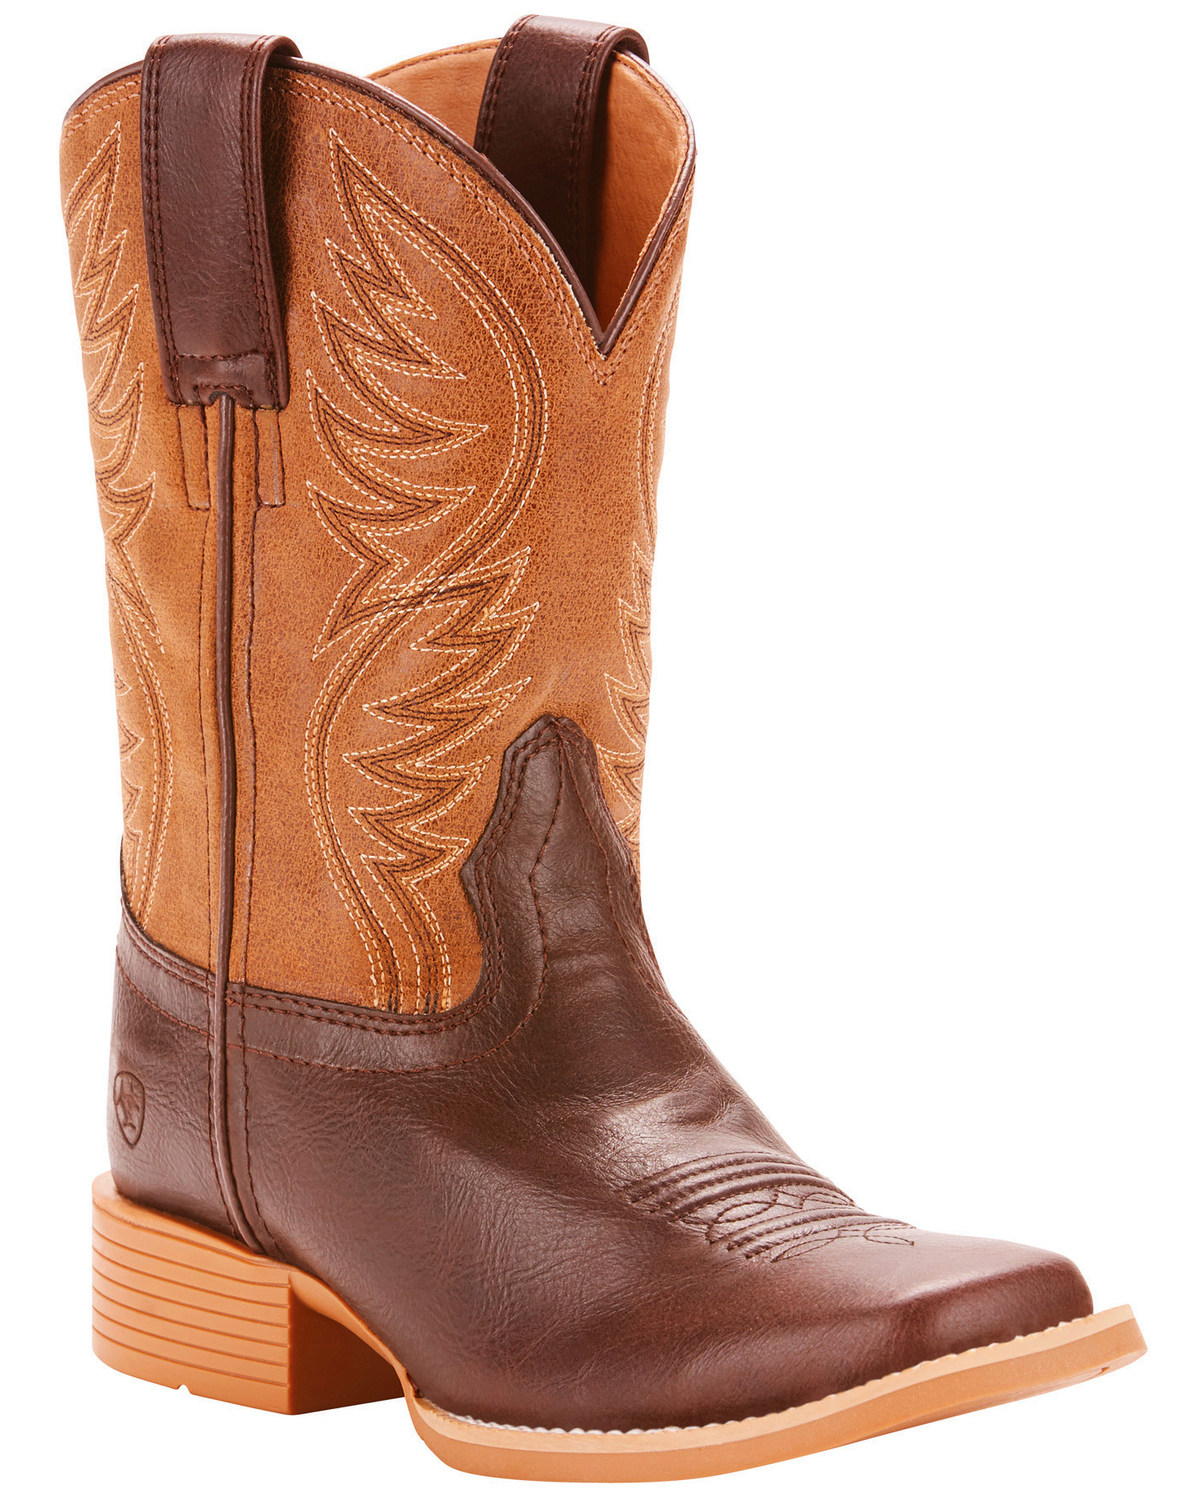 girls cowboy boots on sale